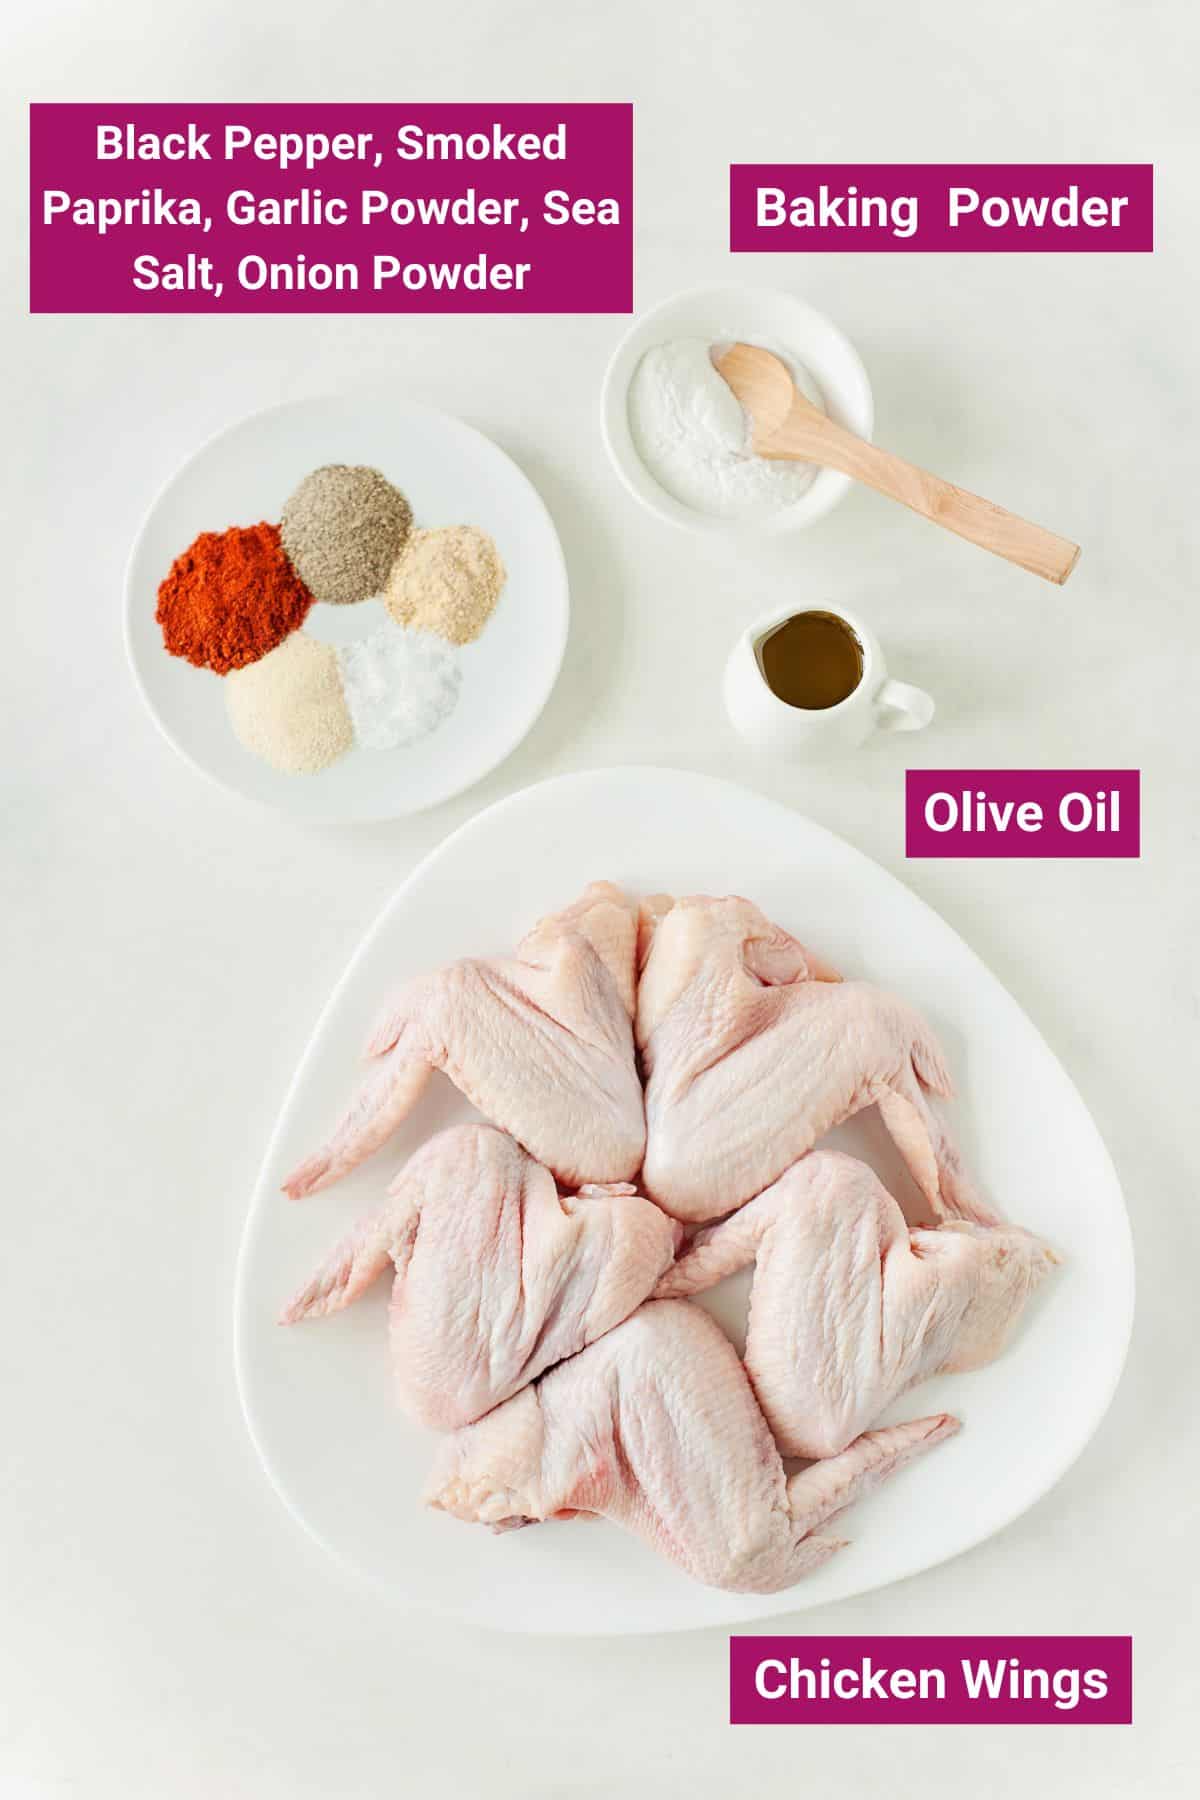 Overhead view of the labeled ingredients needed for air fried wings:  a plate of raw chicken wings, a jug of olive oil, a bowl of baking powder with a spoon, and a plate with black pepper, smoked paprika, garlic powder, sea salt, and onion powder